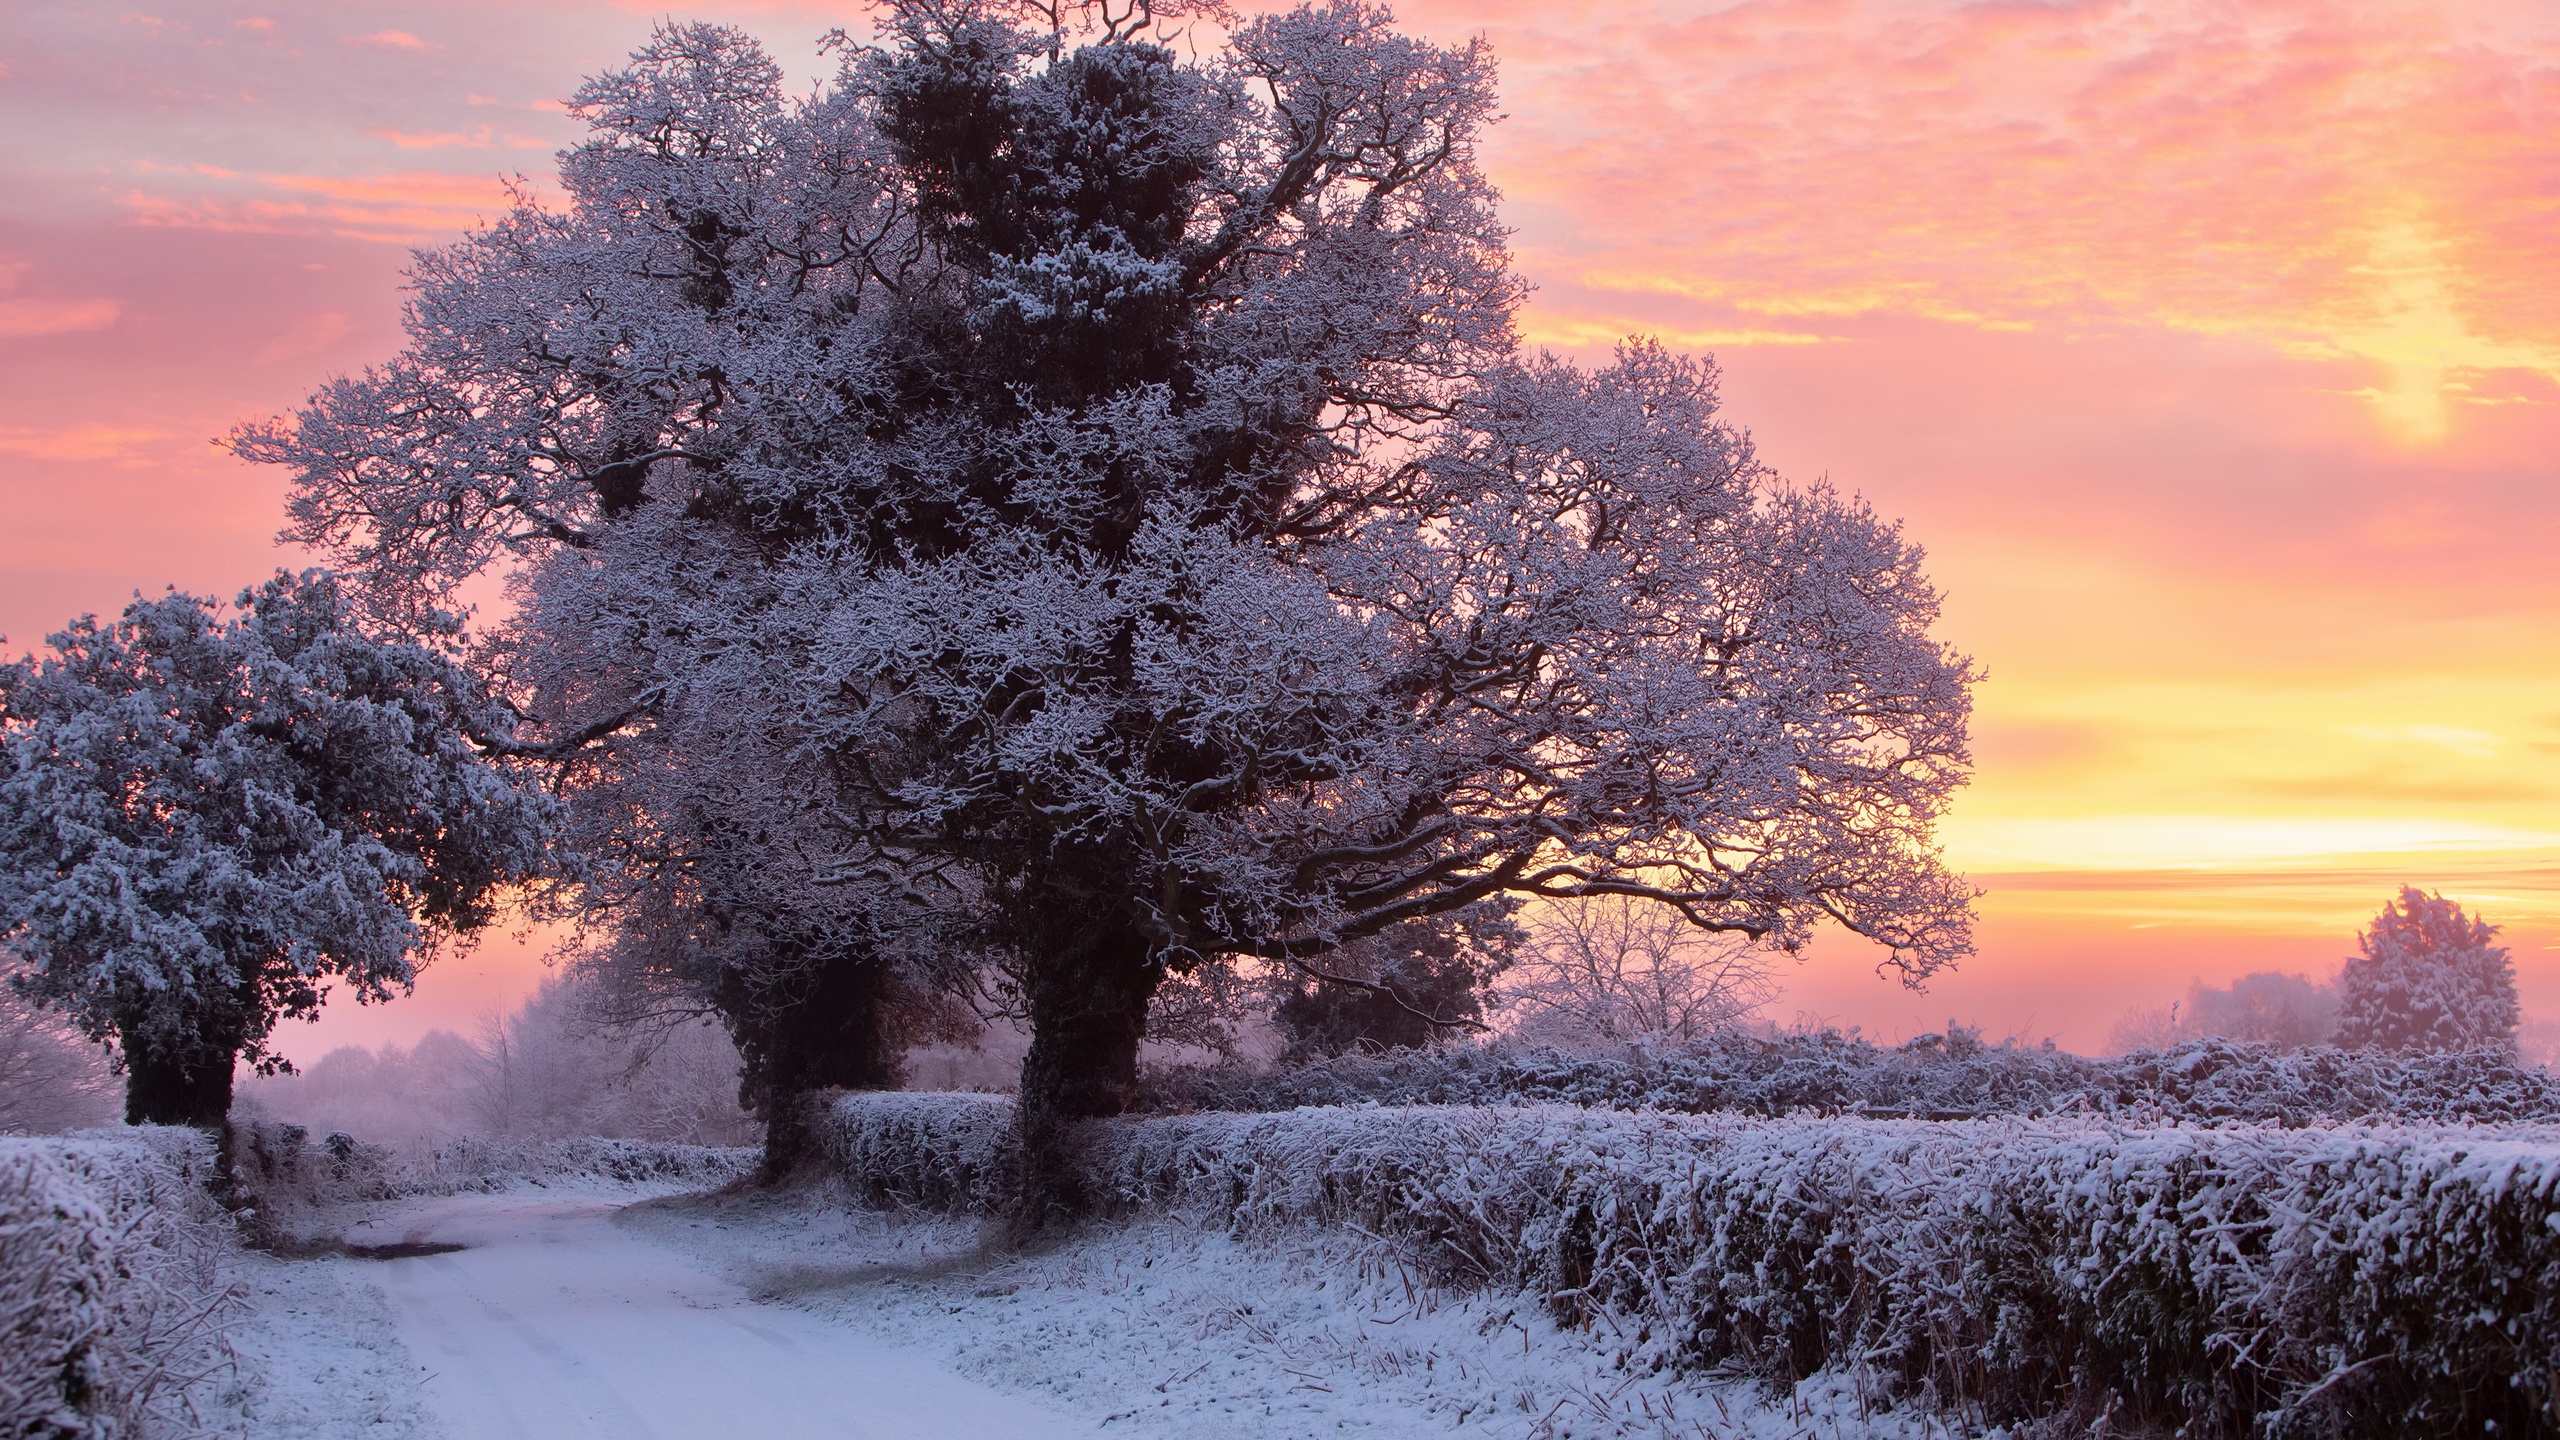 General 2560x1440 outdoors winter cold ice frost snow orange sky nature sunlight trees